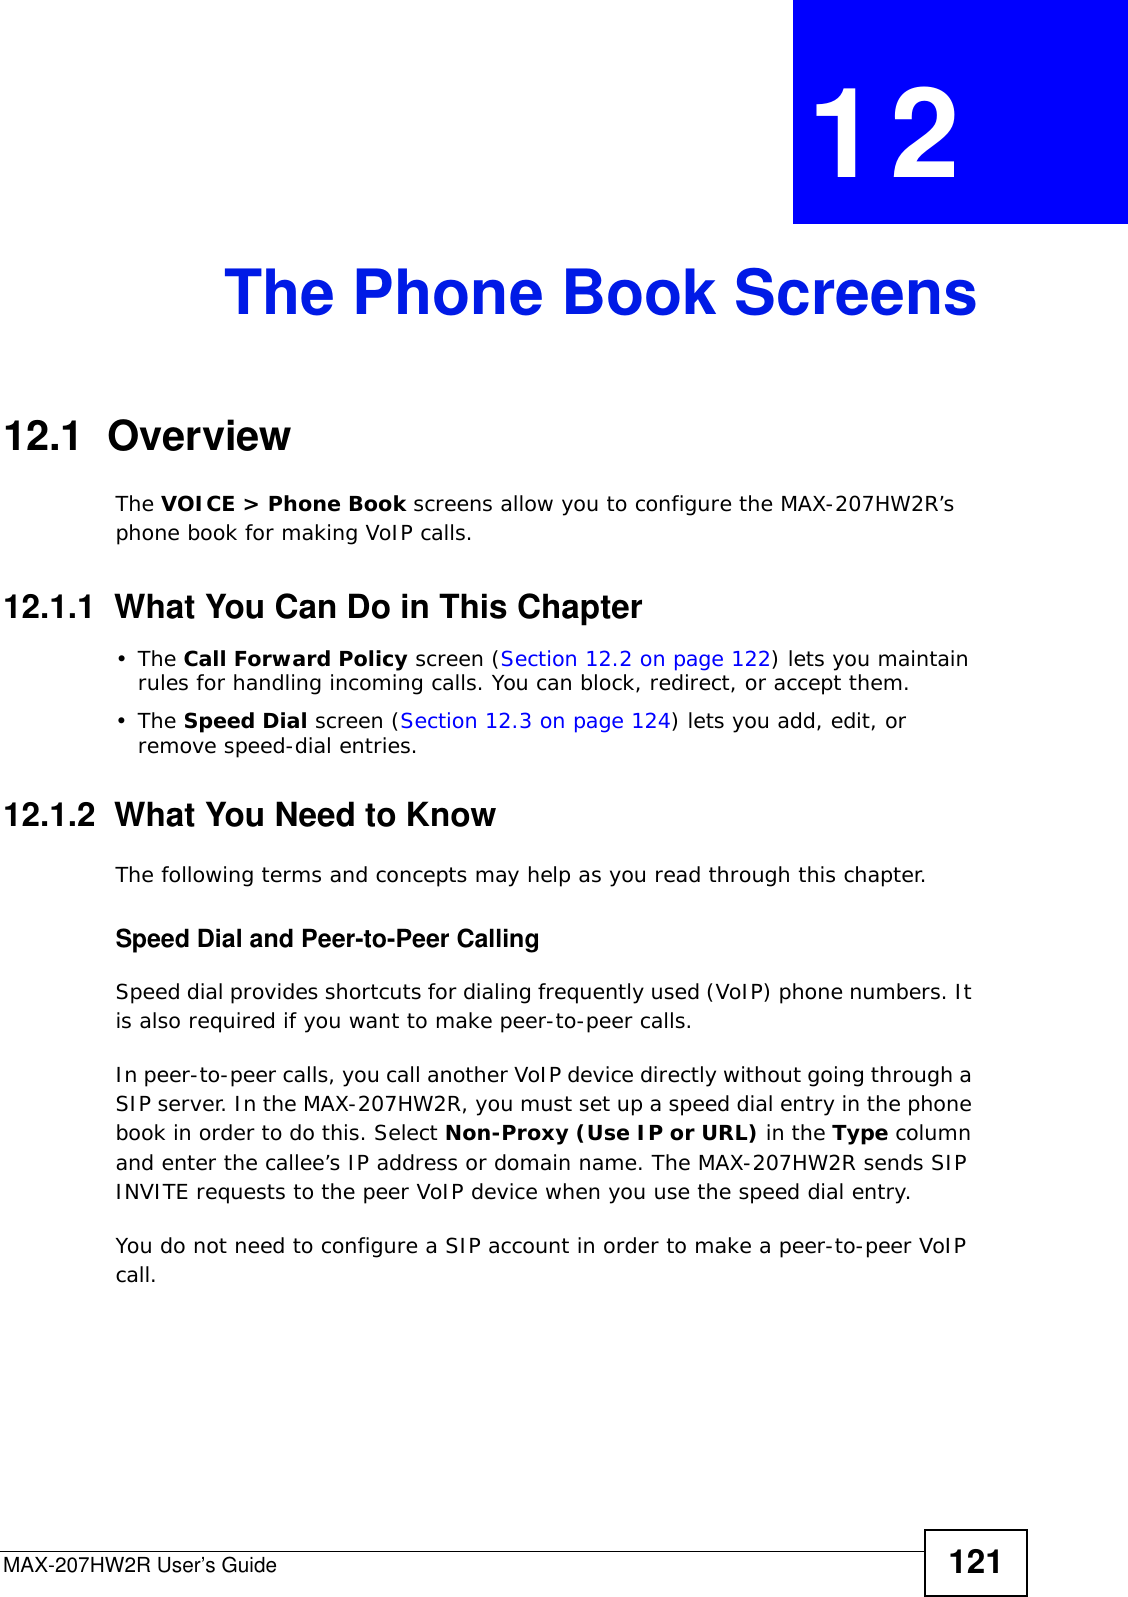 MAX-207HW2R User’s Guide 121CHAPTER  12 The Phone Book Screens12.1  OverviewThe VOICE &gt; Phone Book screens allow you to configure the MAX-207HW2R’s phone book for making VoIP calls.12.1.1  What You Can Do in This Chapter•The Call Forward Policy screen (Section 12.2 on page 122) lets you maintain rules for handling incoming calls. You can block, redirect, or accept them.•The Speed Dial screen (Section 12.3 on page 124) lets you add, edit, or remove speed-dial entries.12.1.2  What You Need to KnowThe following terms and concepts may help as you read through this chapter.Speed Dial and Peer-to-Peer CallingSpeed dial provides shortcuts for dialing frequently used (VoIP) phone numbers. It is also required if you want to make peer-to-peer calls. In peer-to-peer calls, you call another VoIP device directly without going through a SIP server. In the MAX-207HW2R, you must set up a speed dial entry in the phone book in order to do this. Select Non-Proxy (Use IP or URL) in the Type column and enter the callee’s IP address or domain name. The MAX-207HW2R sends SIP INVITE requests to the peer VoIP device when you use the speed dial entry.You do not need to configure a SIP account in order to make a peer-to-peer VoIP call.